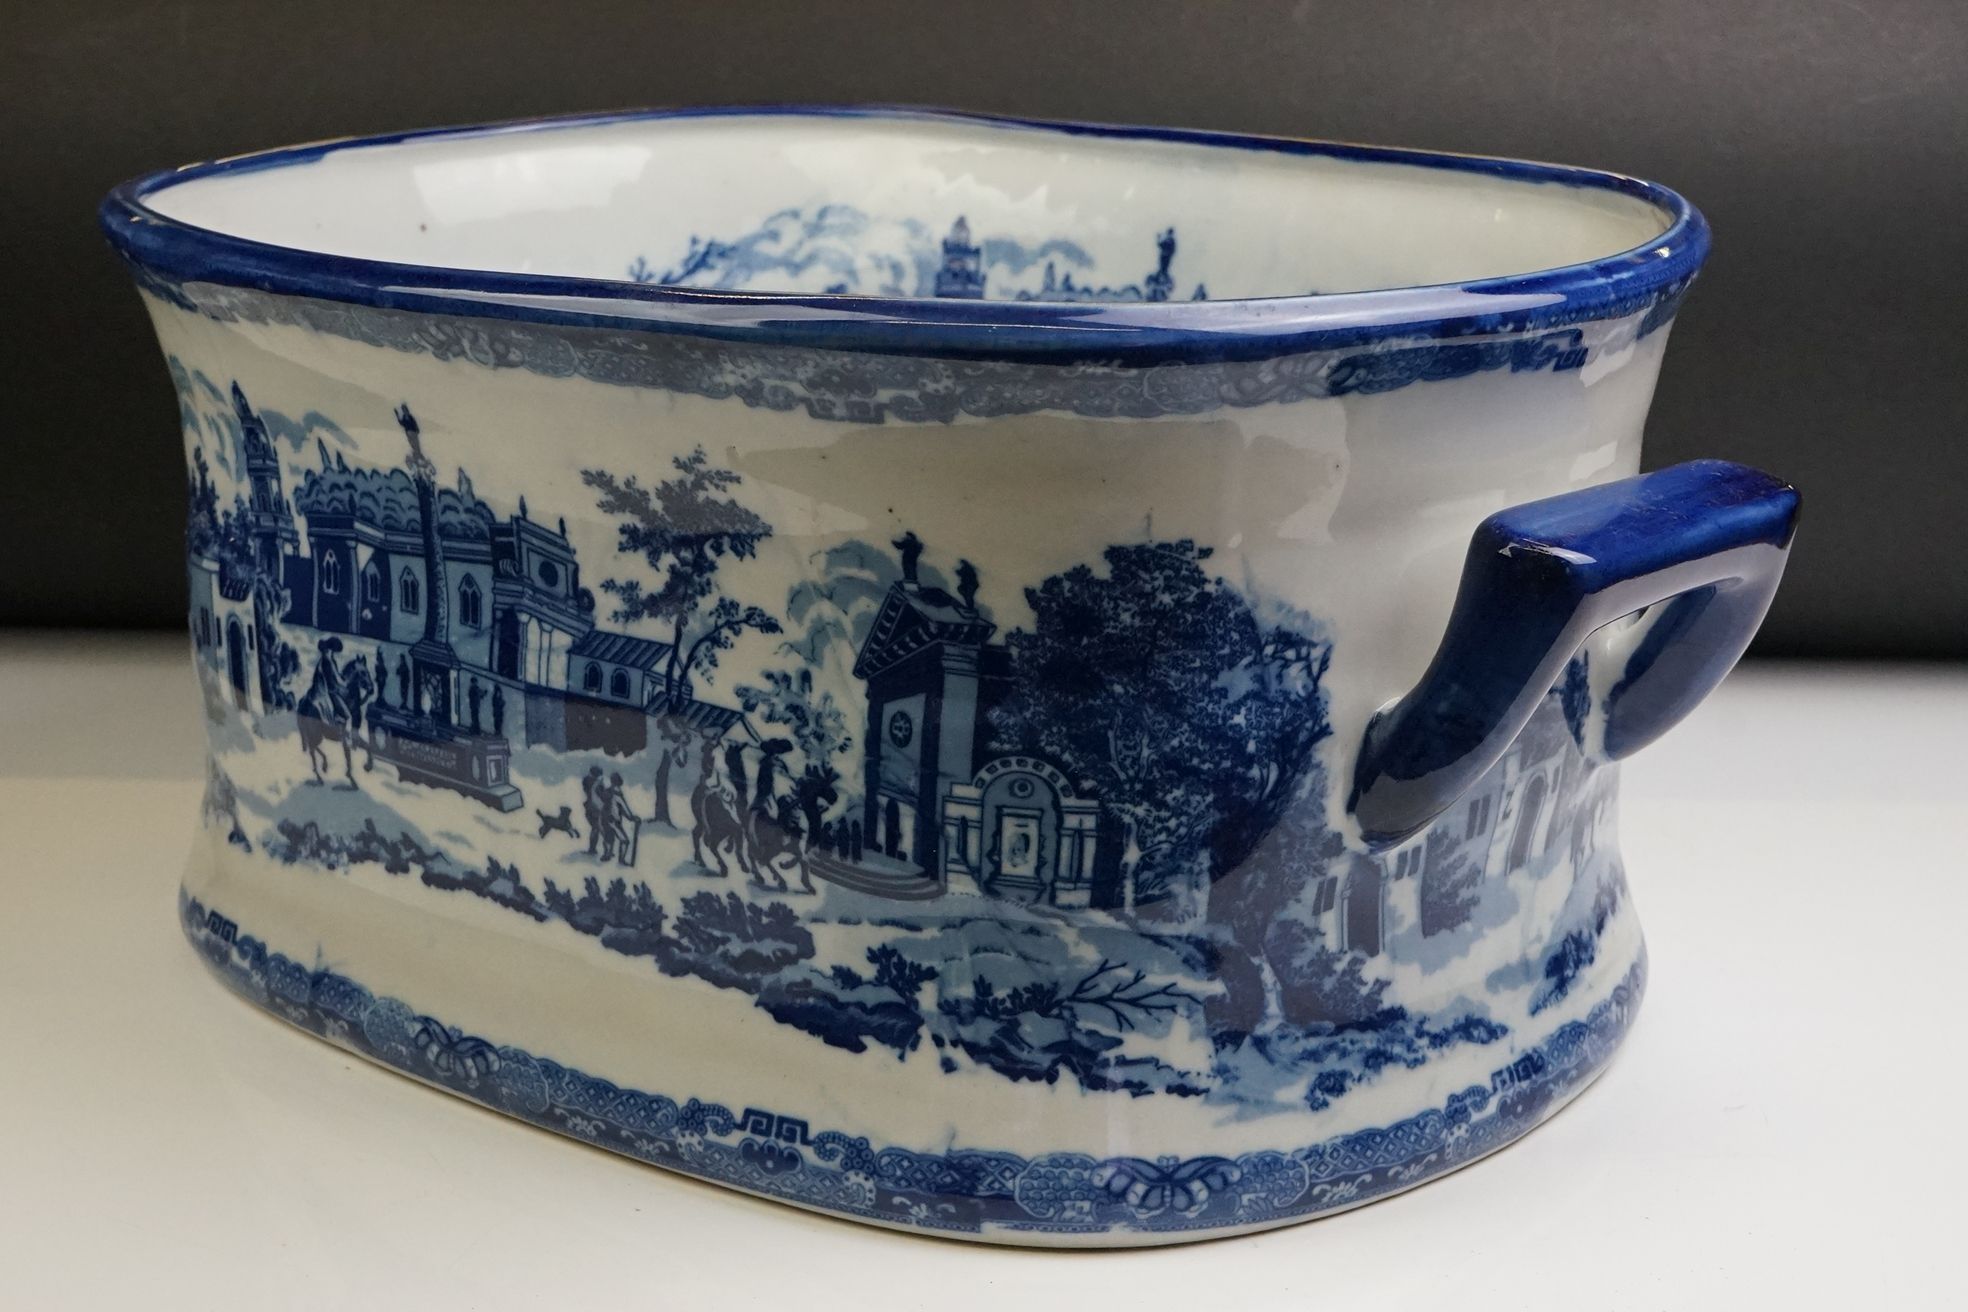 Blue & White Ironstone Foot Bath with typical transfer printed decoration, approximately 47cm wide - Image 4 of 10